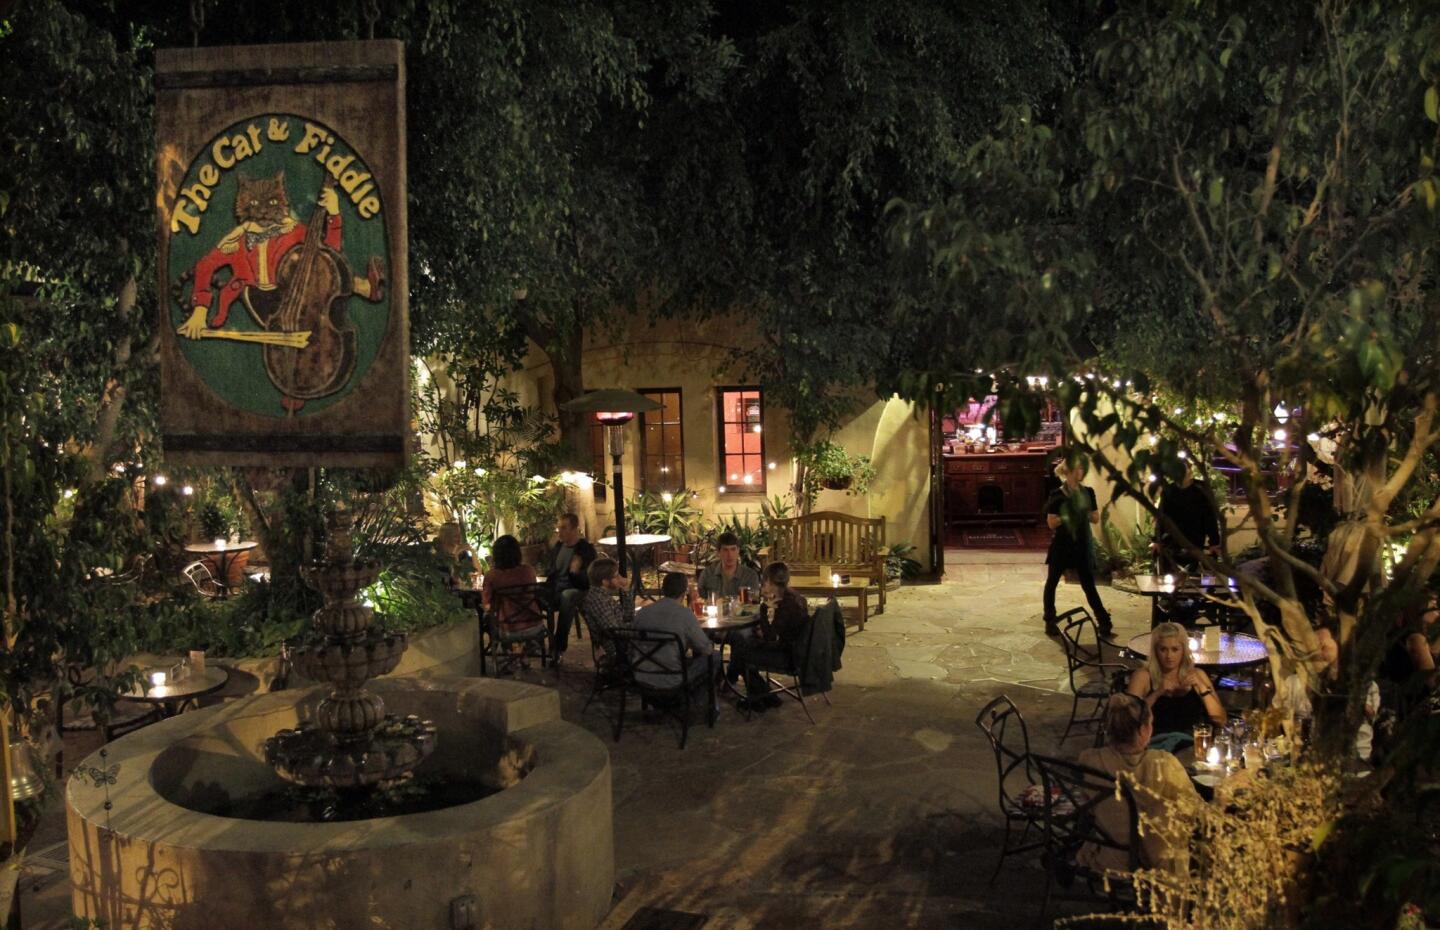 The Cat & Fiddle's famous courtyard patio on Oct. 10, 2012.